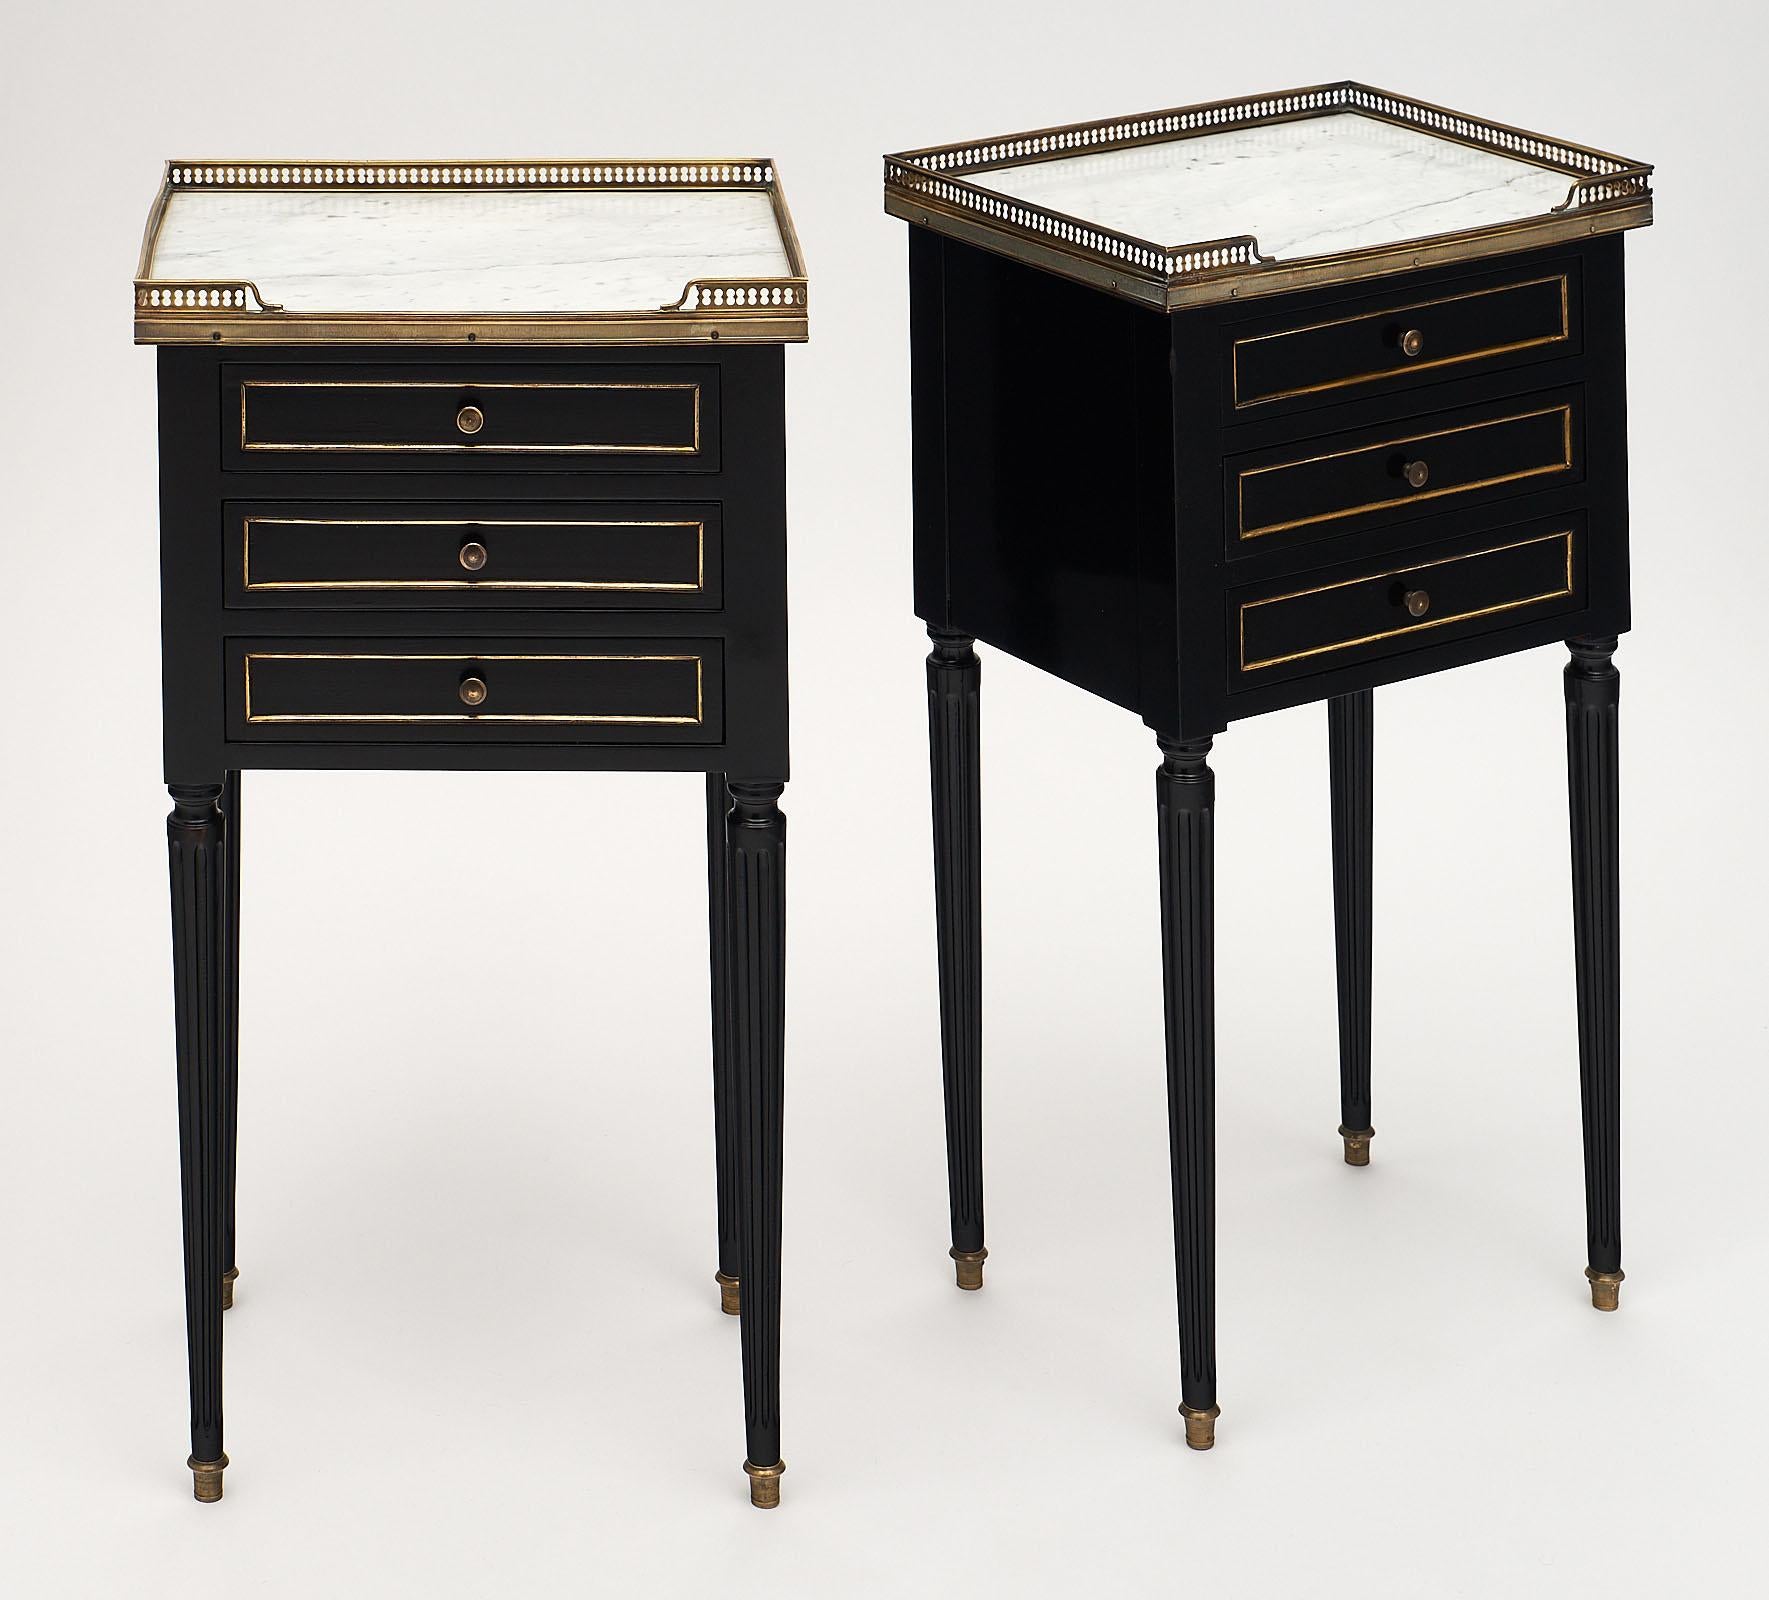 A pair of Fine Louis XVI style side tables with brass trim around original Carrara marble tops. We love the brass galleries and trim throughout, three dovetailed drawers, and original brass pulls. These tables are made of ebonized mahogany finished